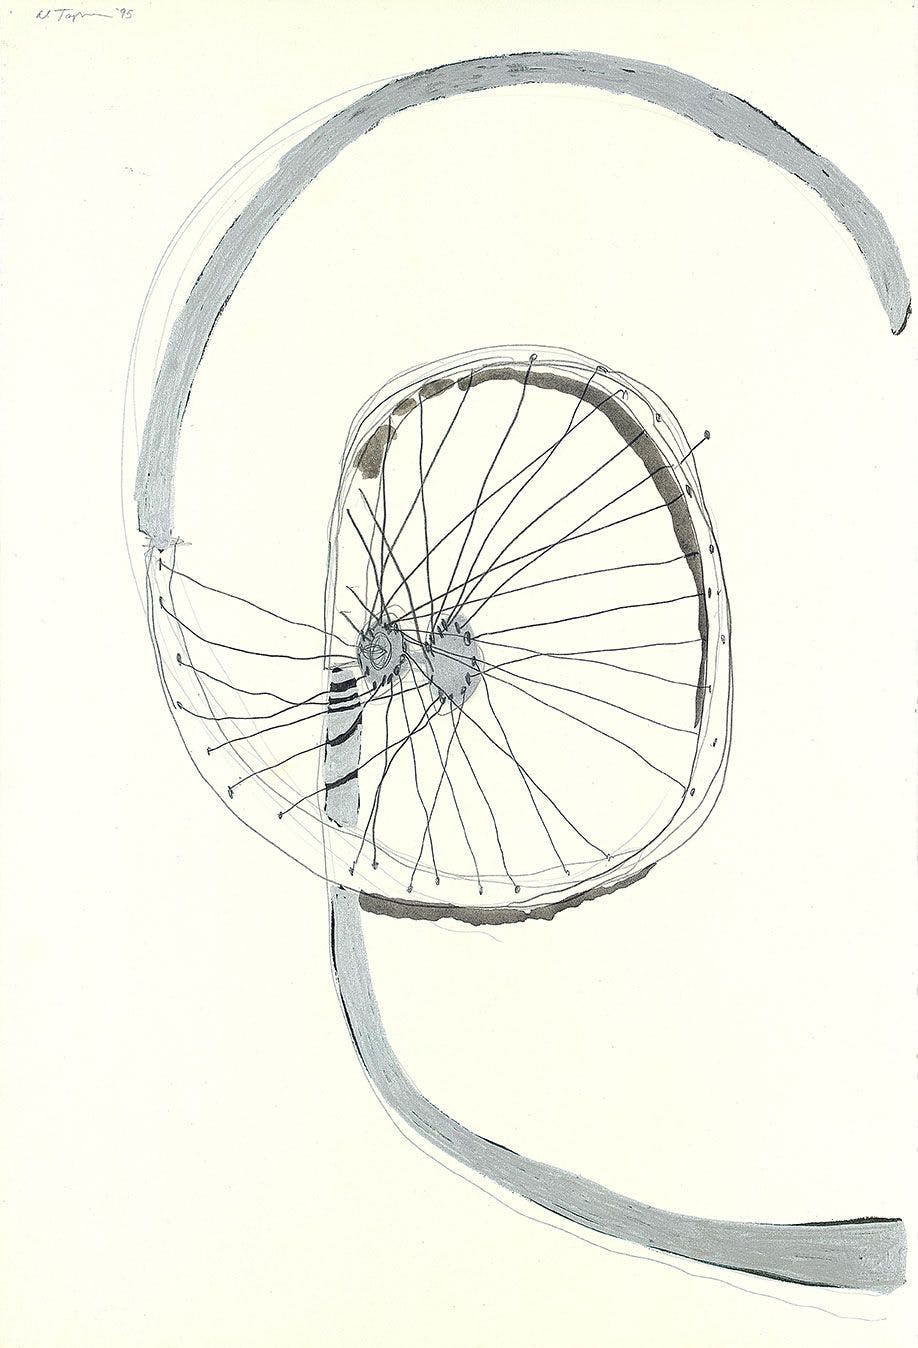 A mixed media work on paper by Al Taylor, titled Rim Job, dated 1995.